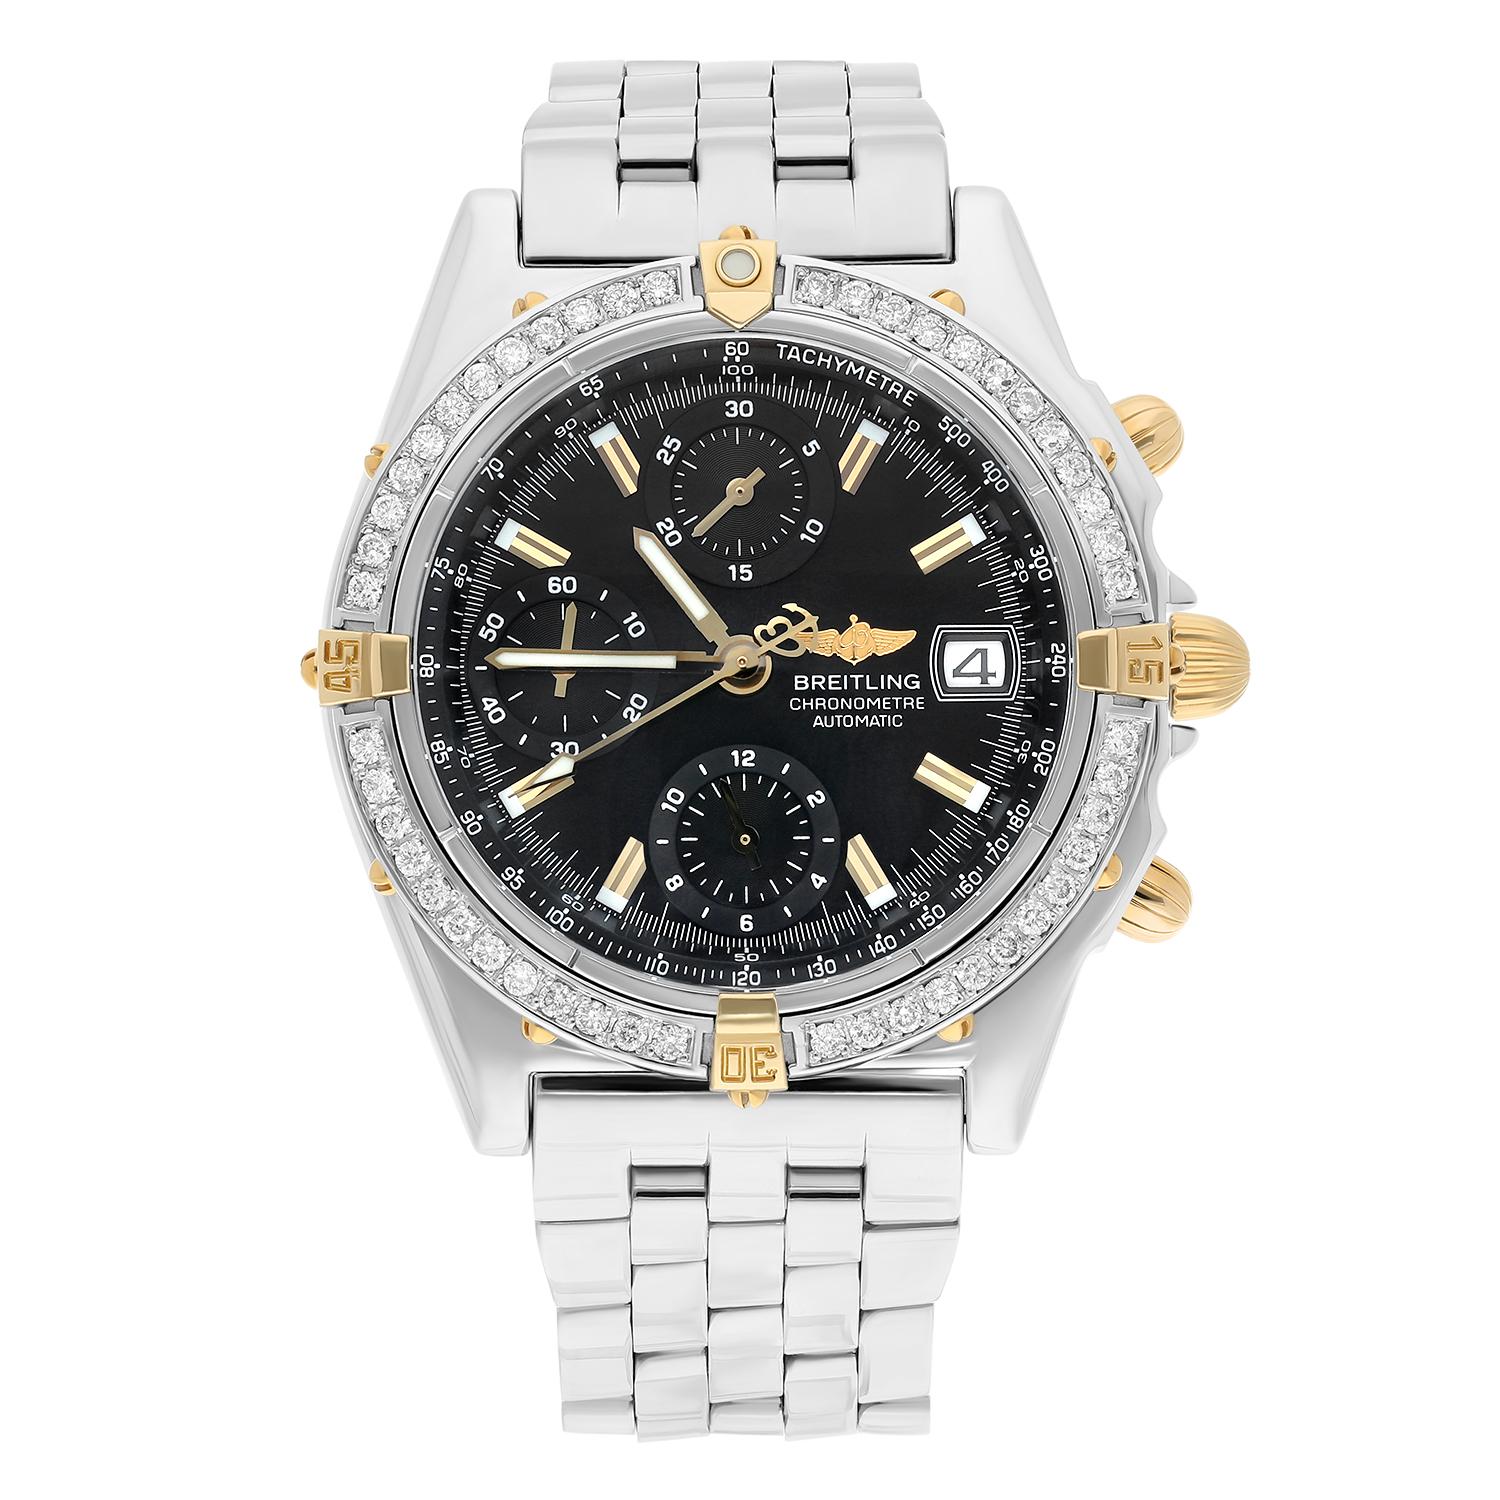 Brand: Breitling 
Series: Chronomat  
Model: B13352
Case Diameter: 39 mm
Bracelet: Stainless steel
Bezel: YG, Custom diamond set
Dial: Black dial
The sale includes a jewelry watch box and an appraisal certificate which states the watch's